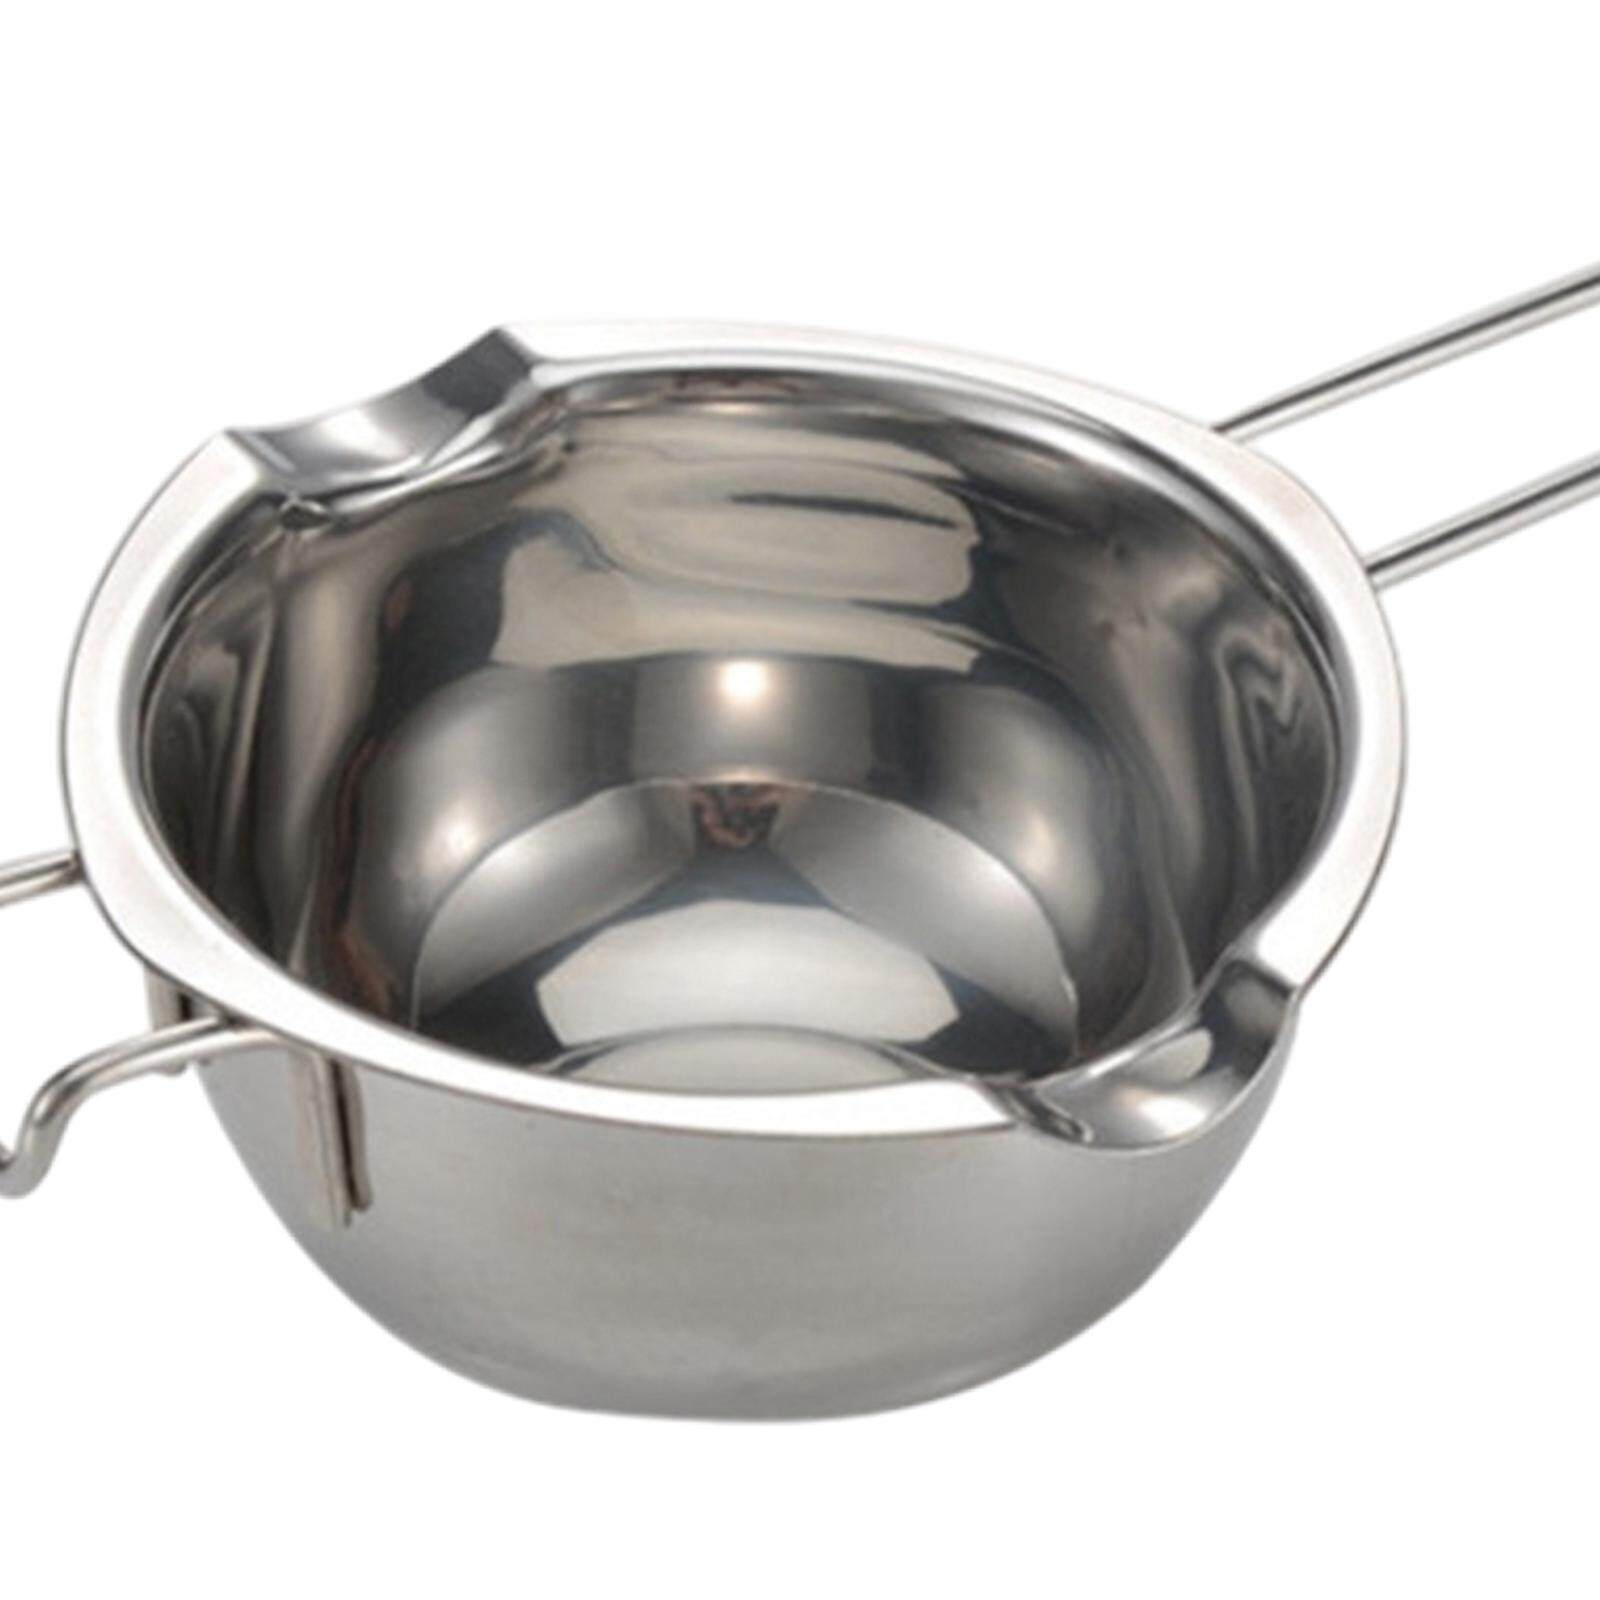 Fityle 2 Pieces Stainless Steel Wax Melting Pot Double Boiler for